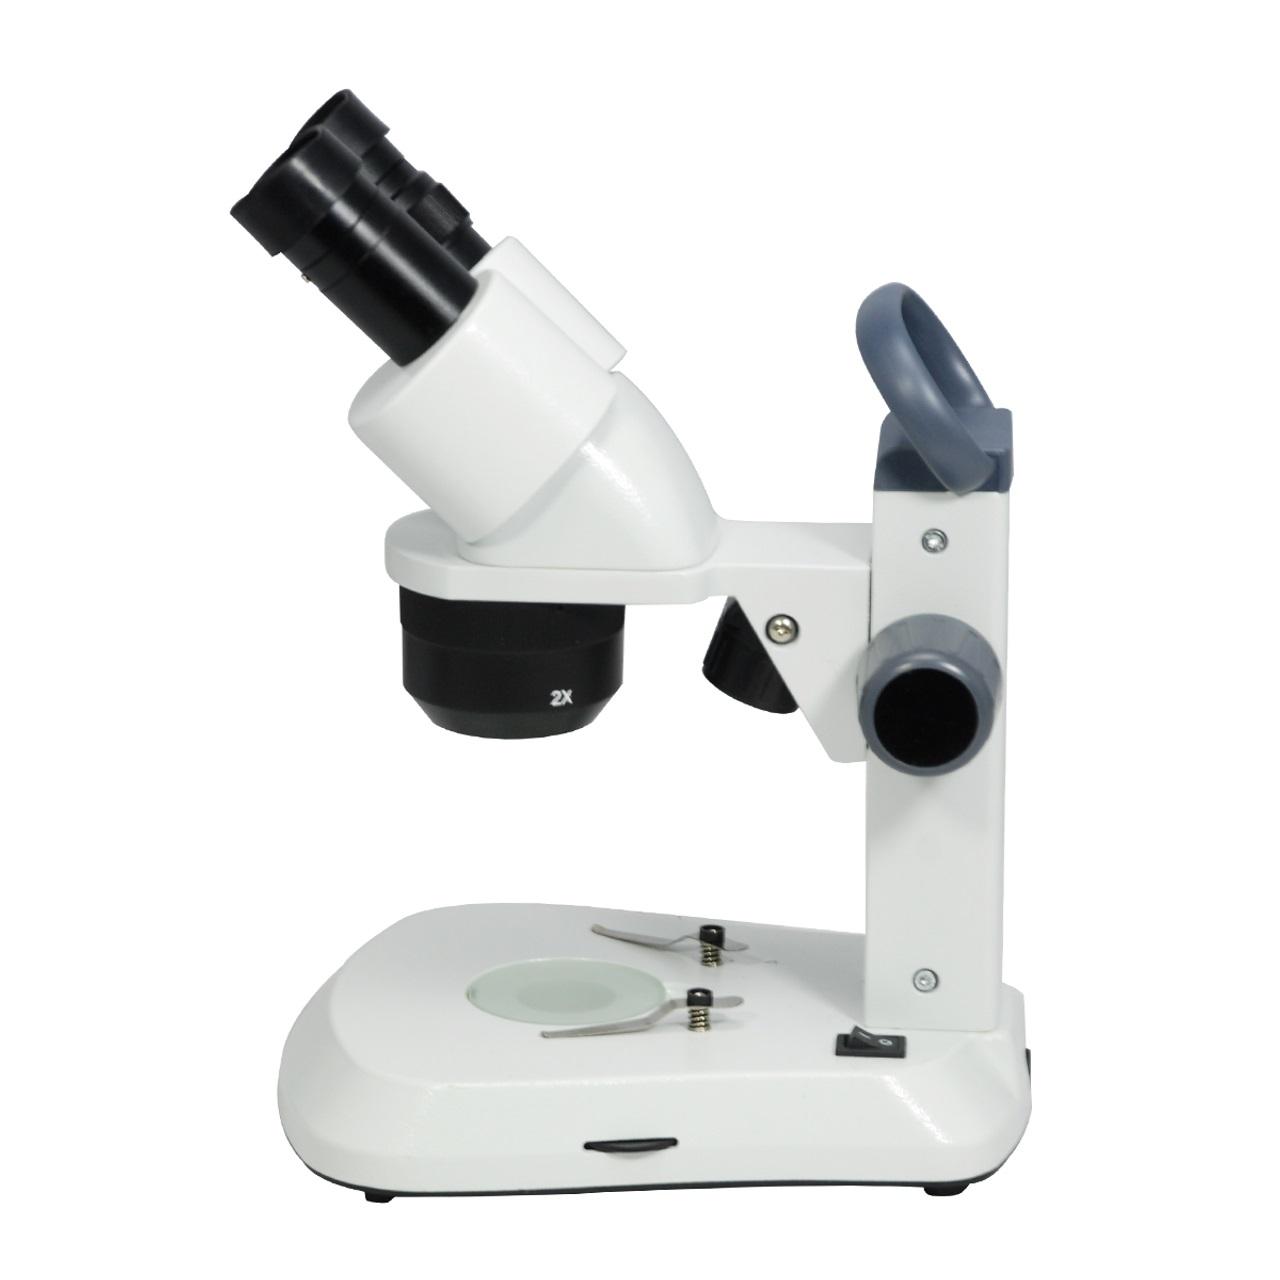 Tri-Power Stereo Microscope: 10X Widefield Eyepiece; 20X, 30X, 40X Magnification; LED Corded Illumination